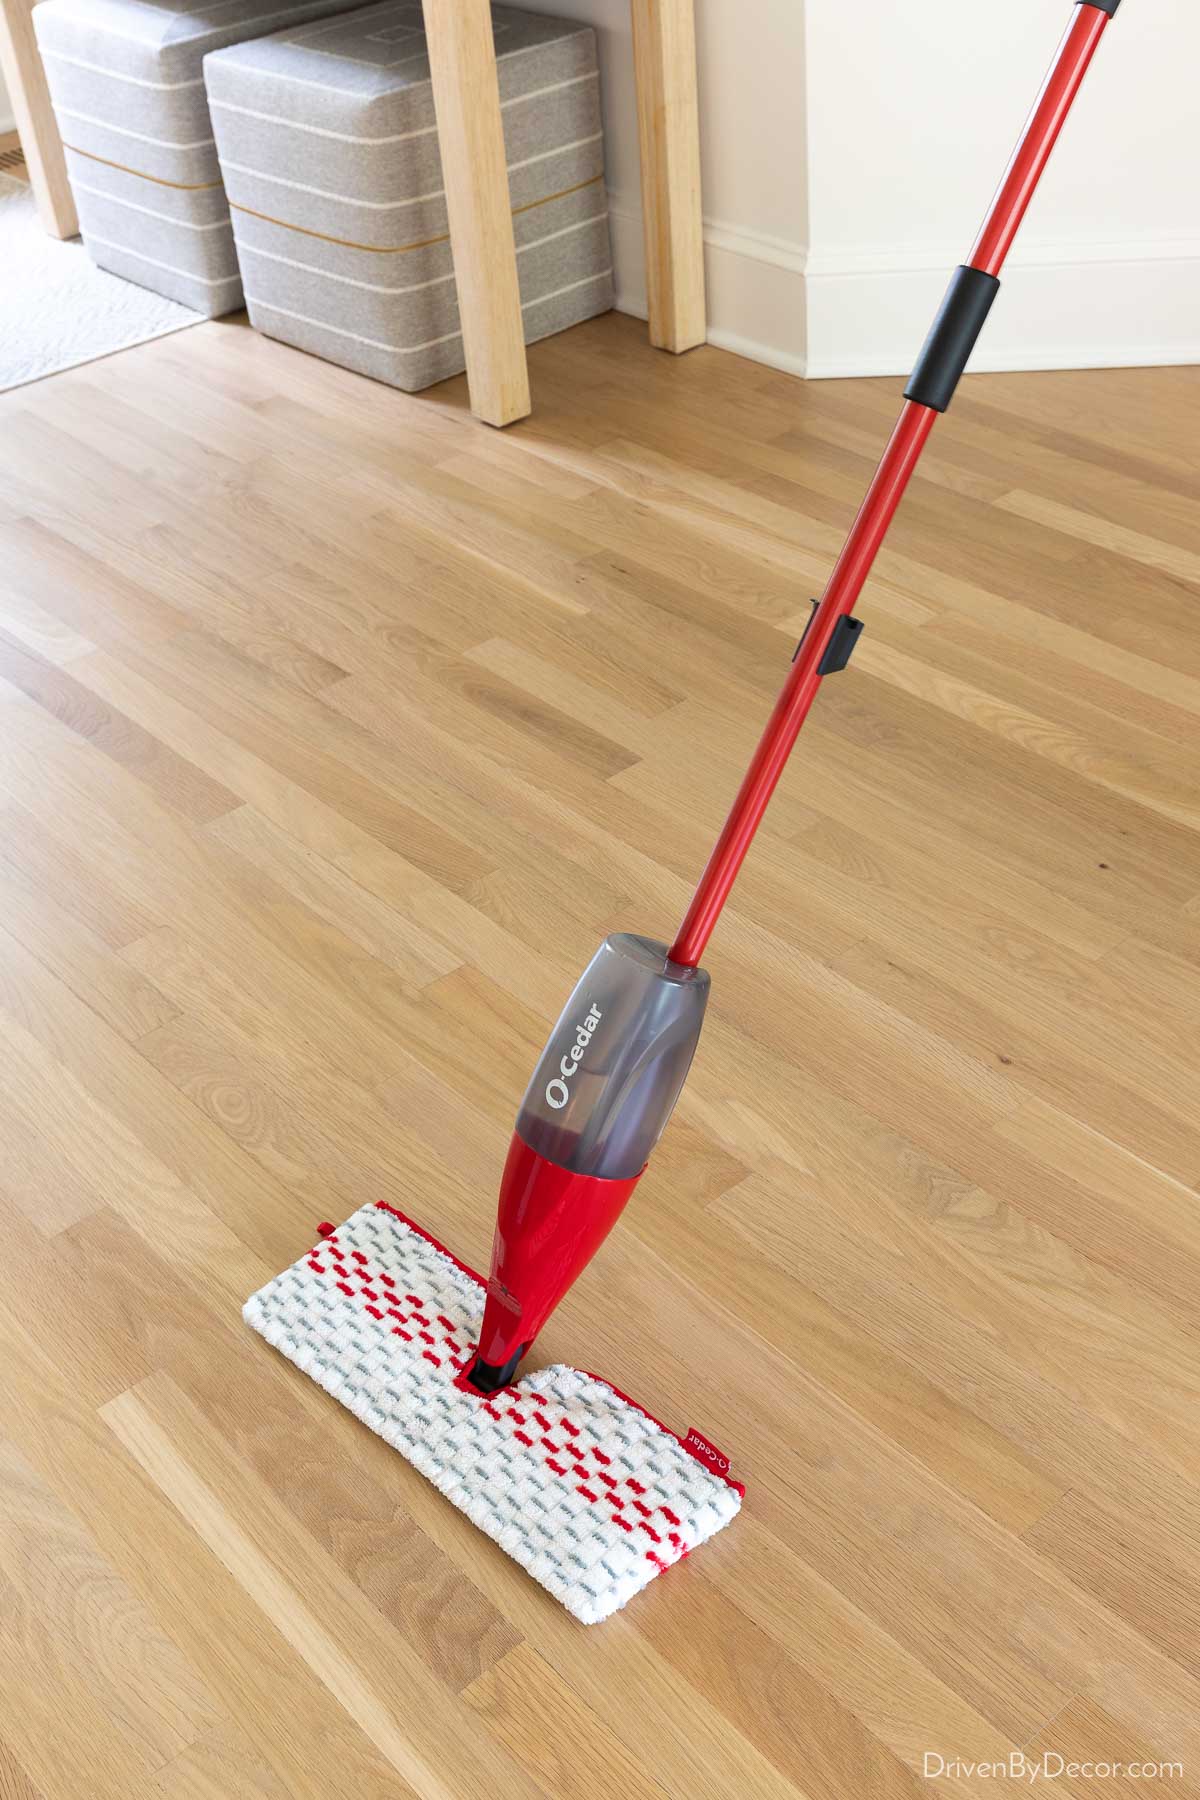 Details on how to clean hardwood floors using this microfiber spray mop